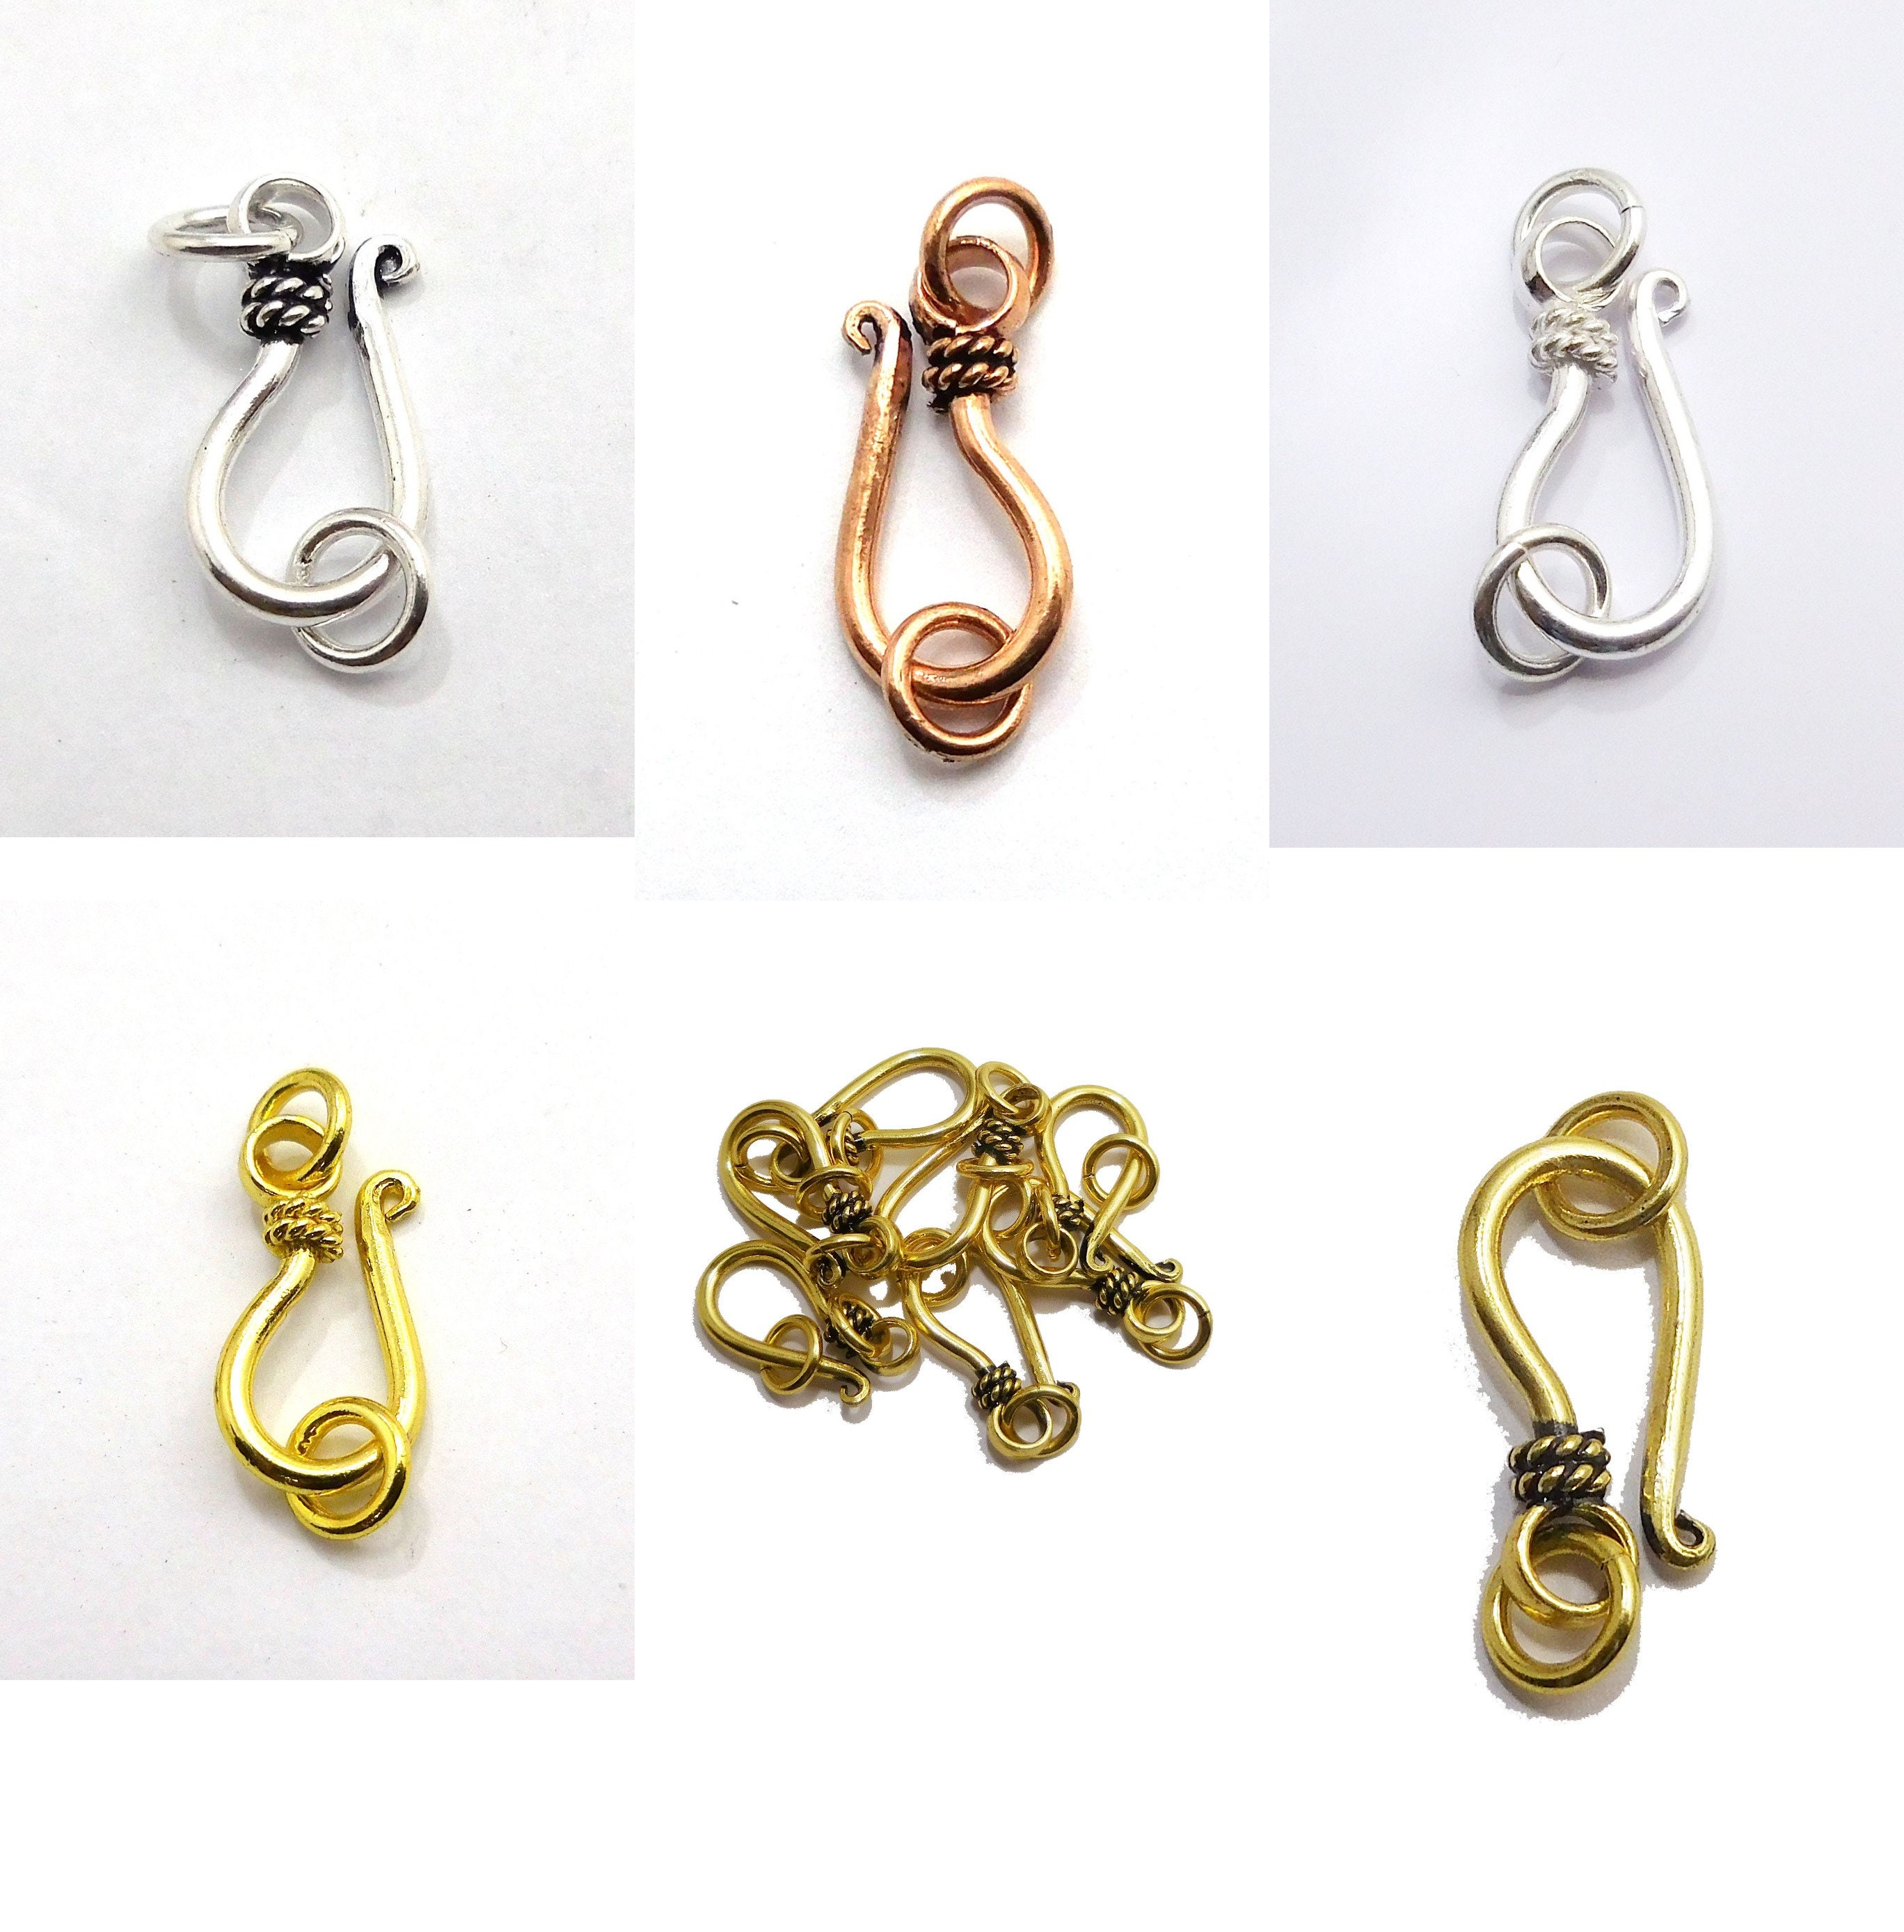 Screw Magnetic Clasps for Necklaces Safety Magnetic Locking Jewelry Clasp  Converter - Walmart.com